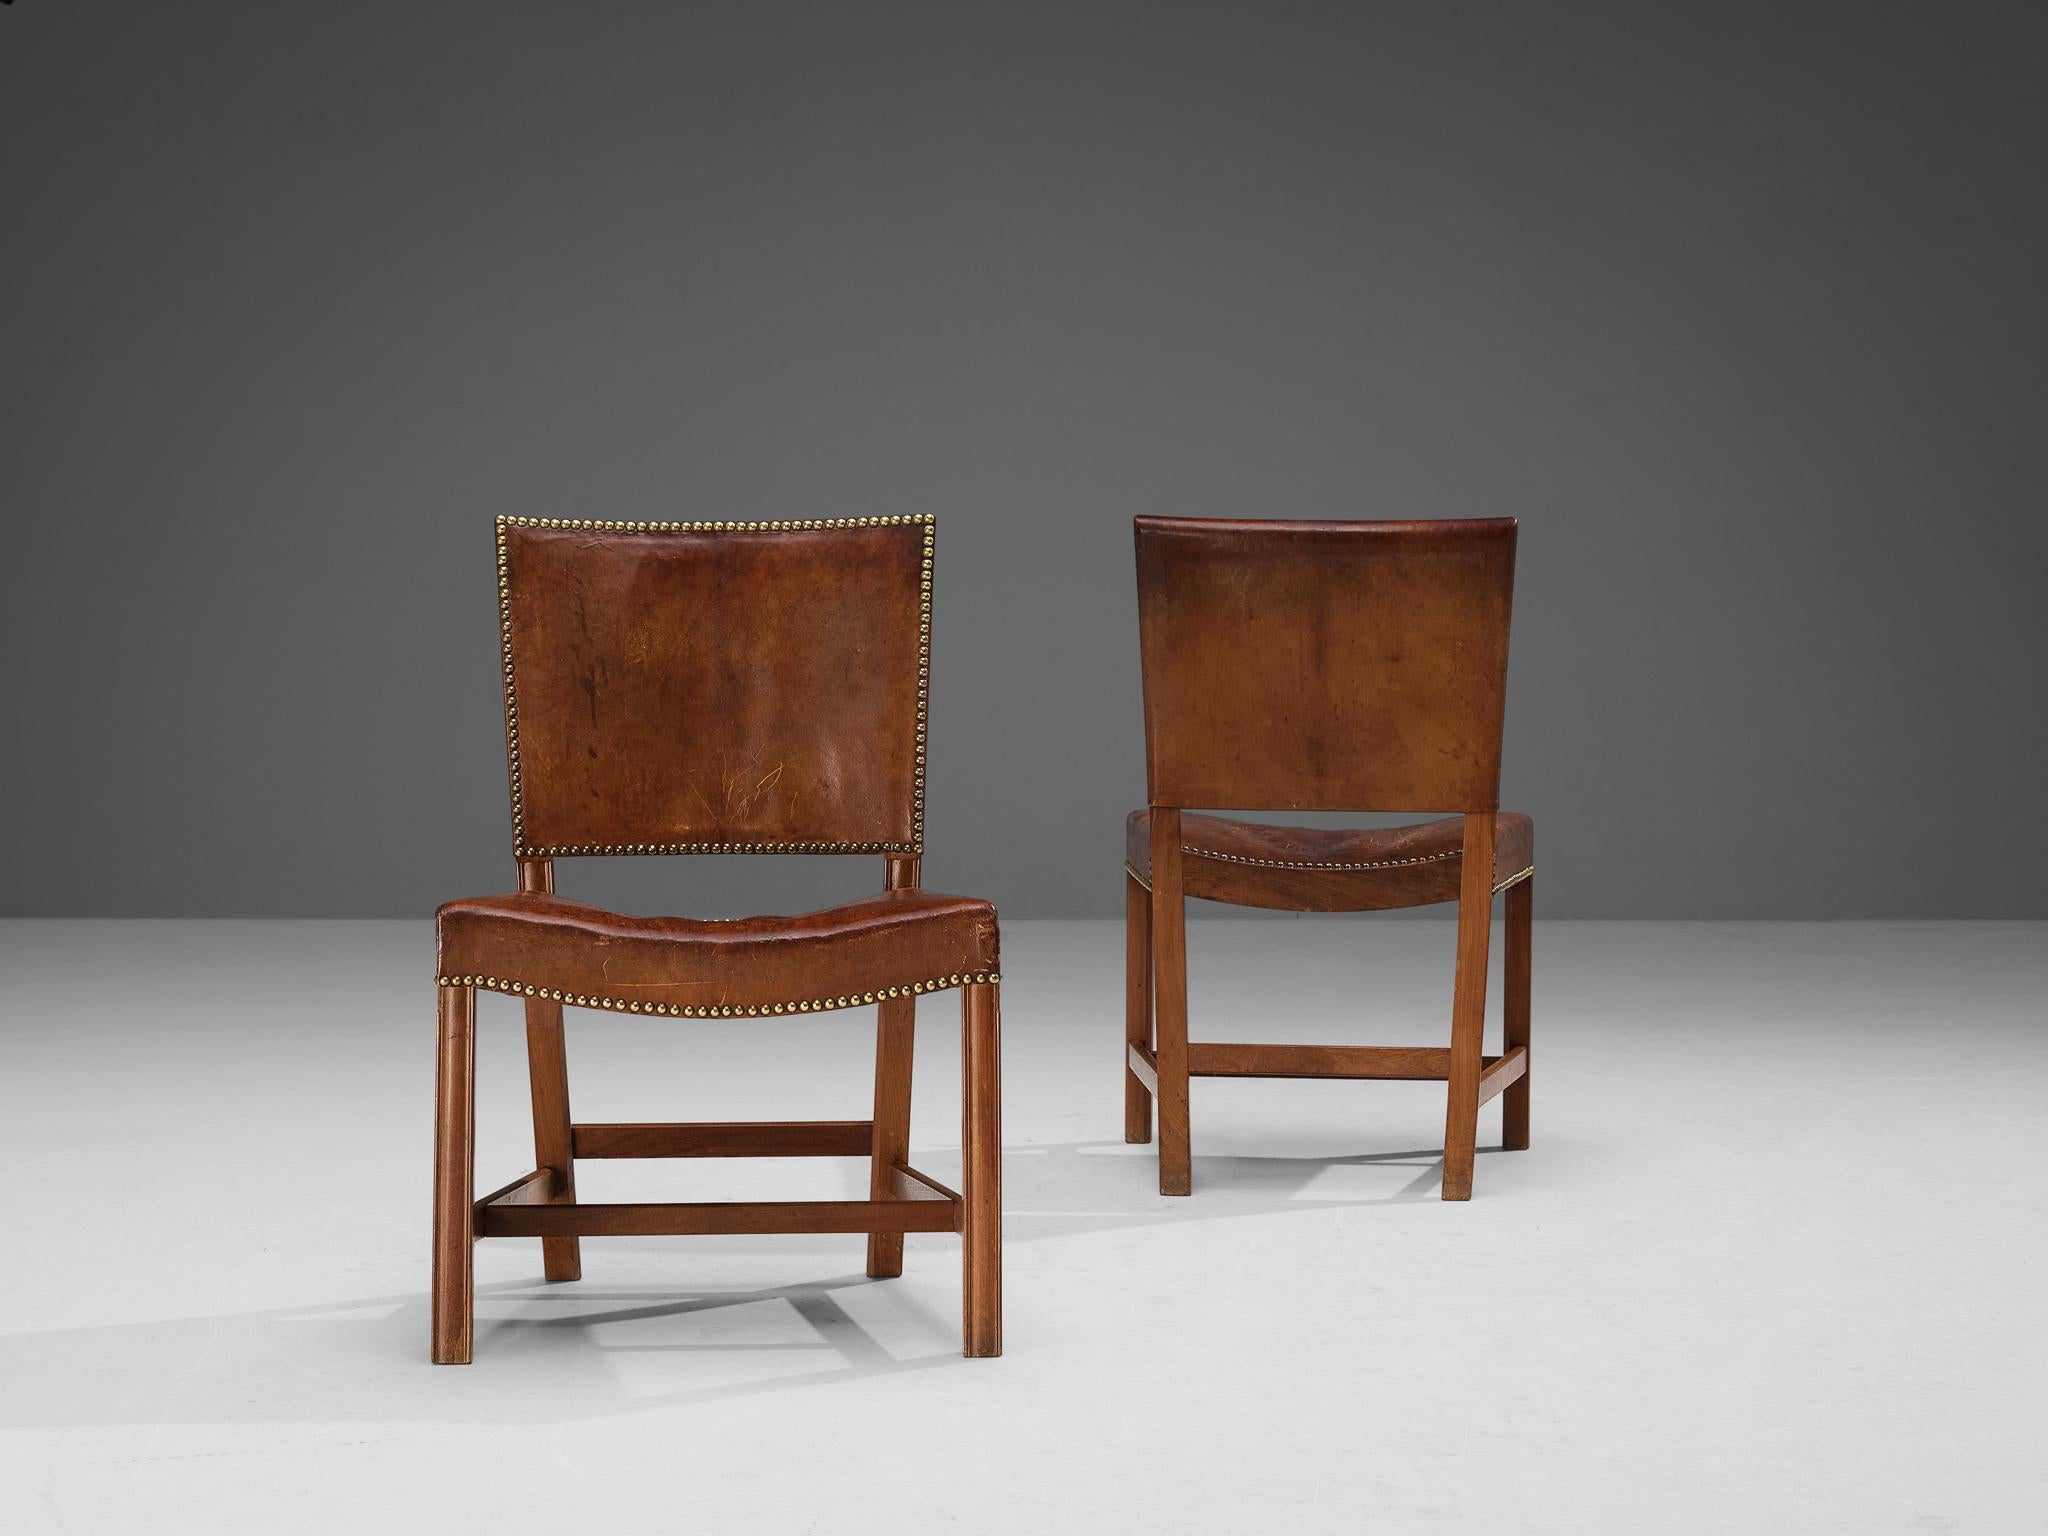 Brass Kaare Klint for Rud Rasmussen Pair of 'Red Chairs' in Niger Leather